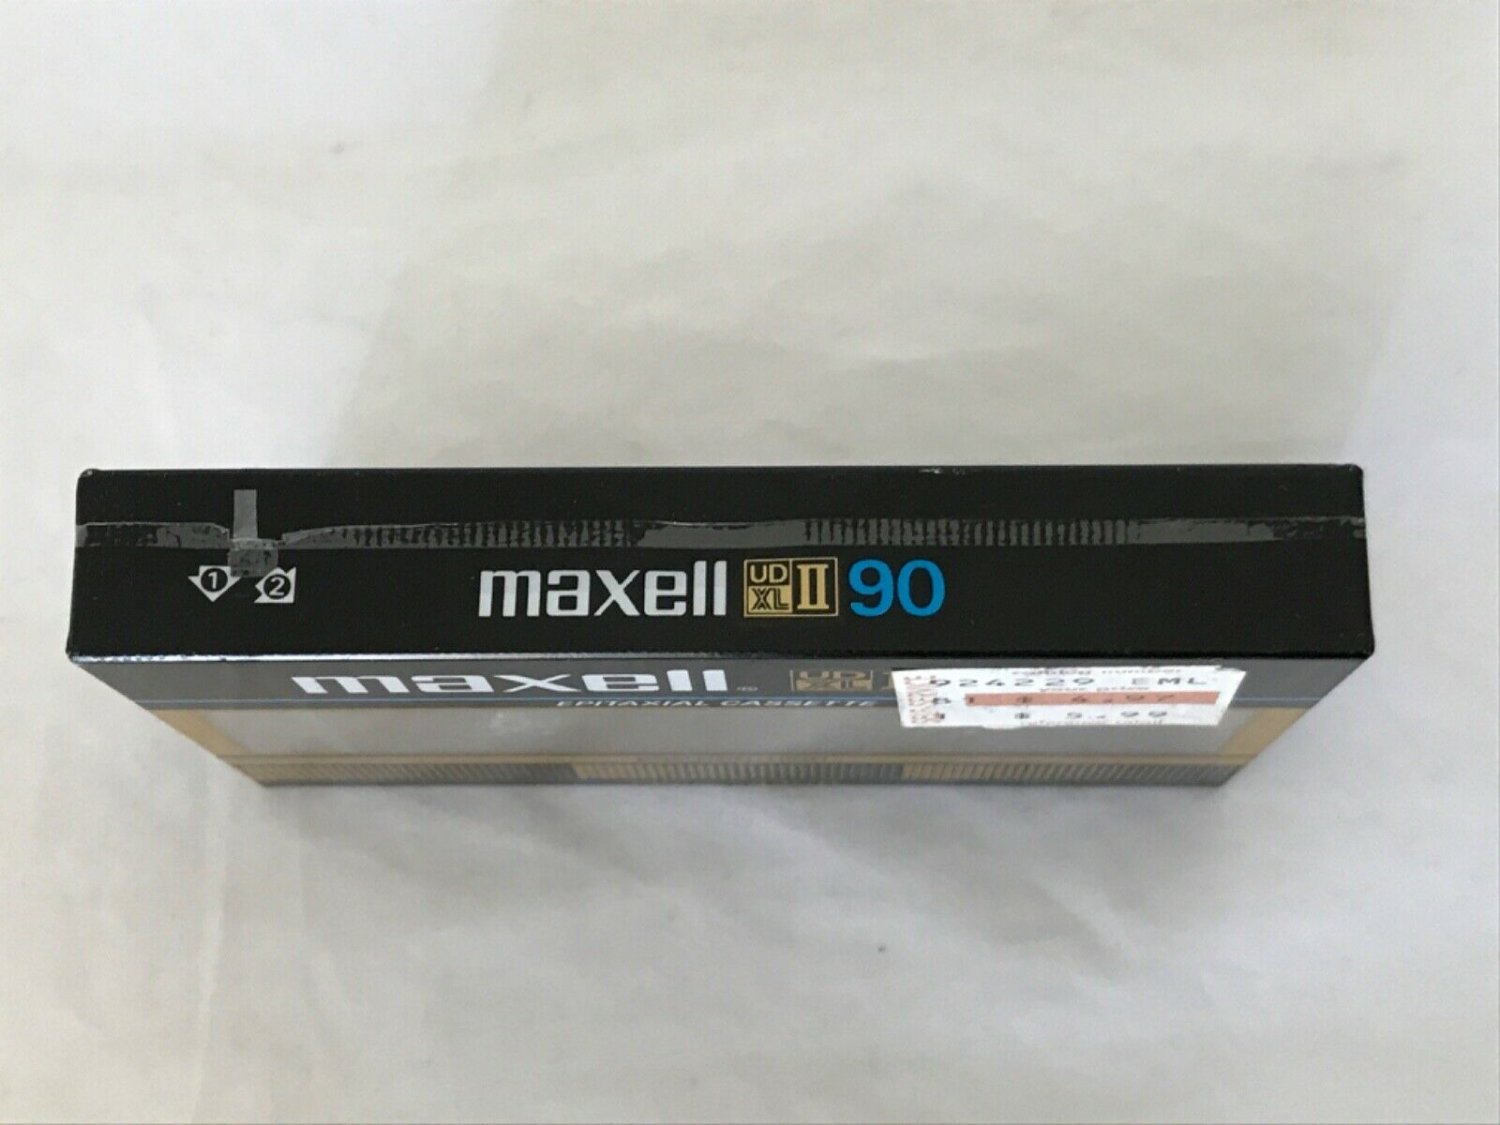 Maxell UD XL II 90 Epitaxial Cassette Tape Vintage Made in Japan